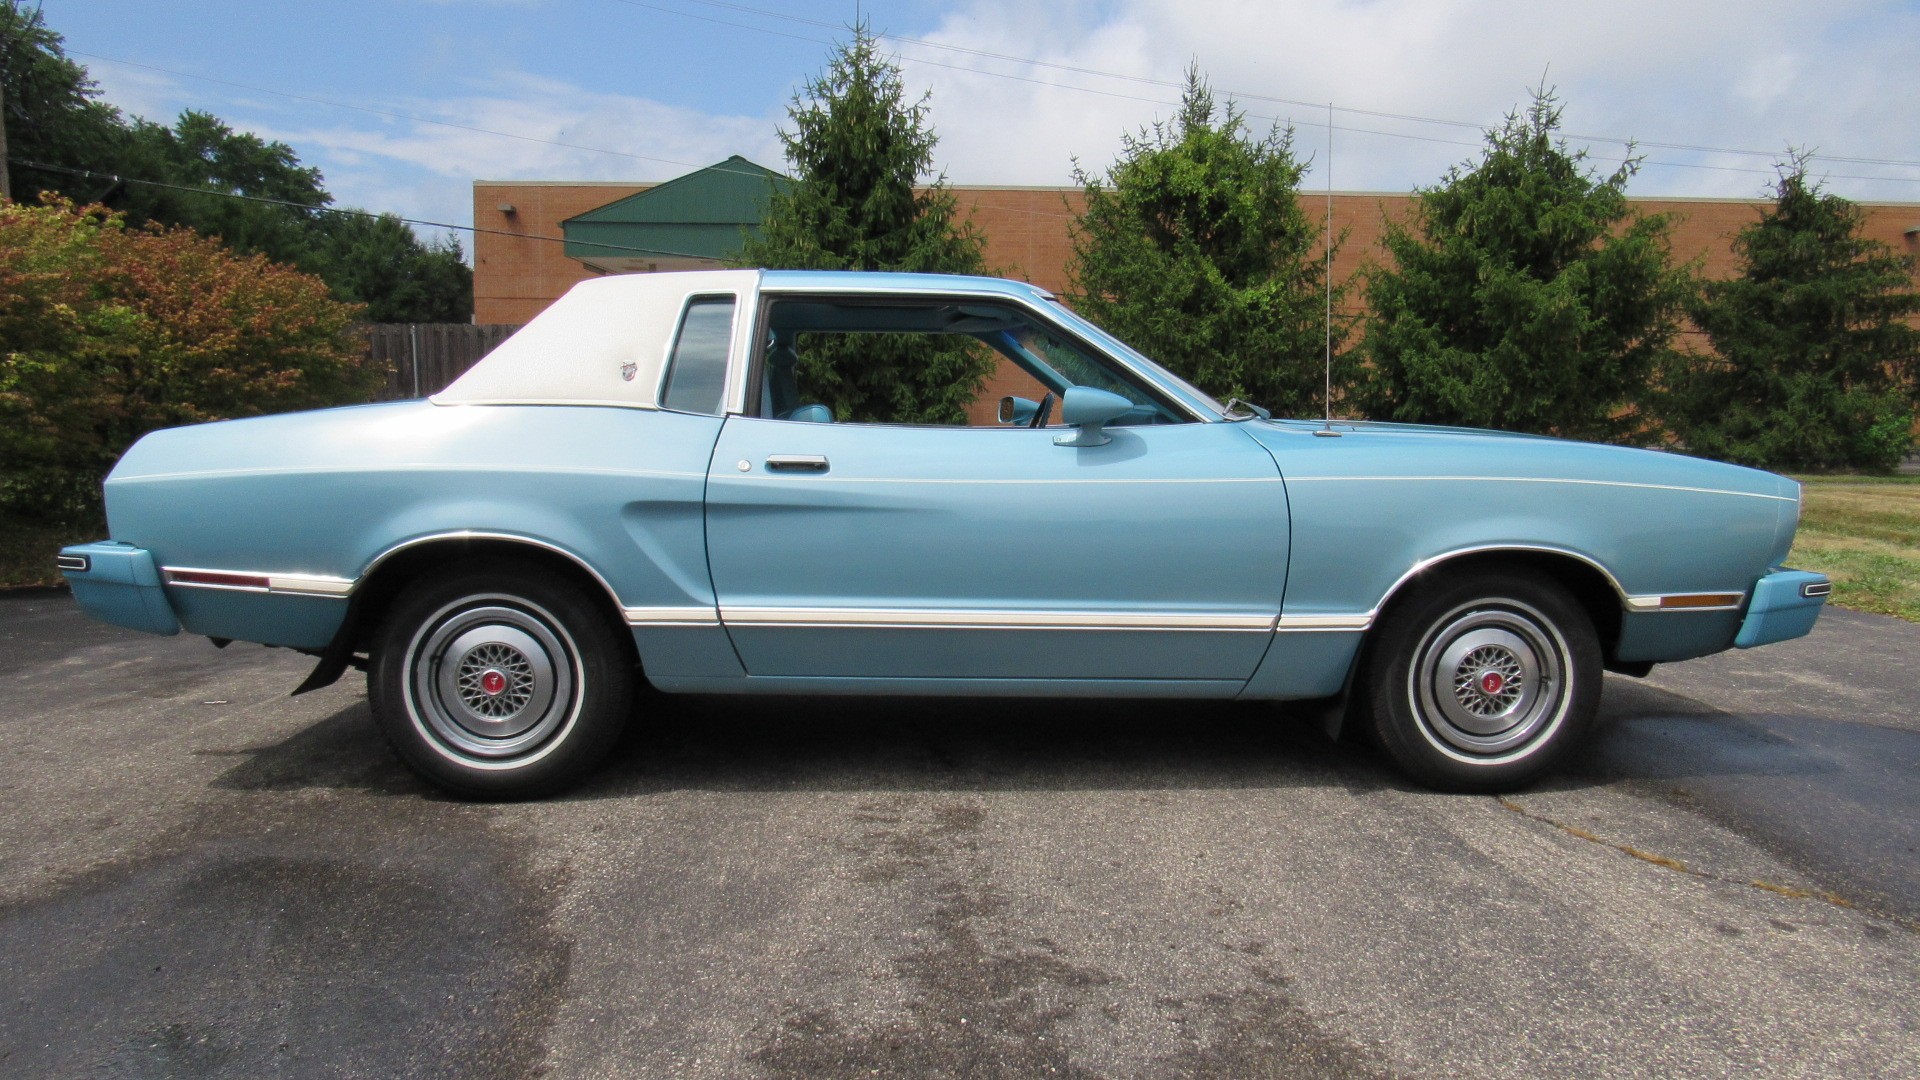 1977 Ford Mustang Ghia, 8500 Miles, 4 Speed, SOLD!